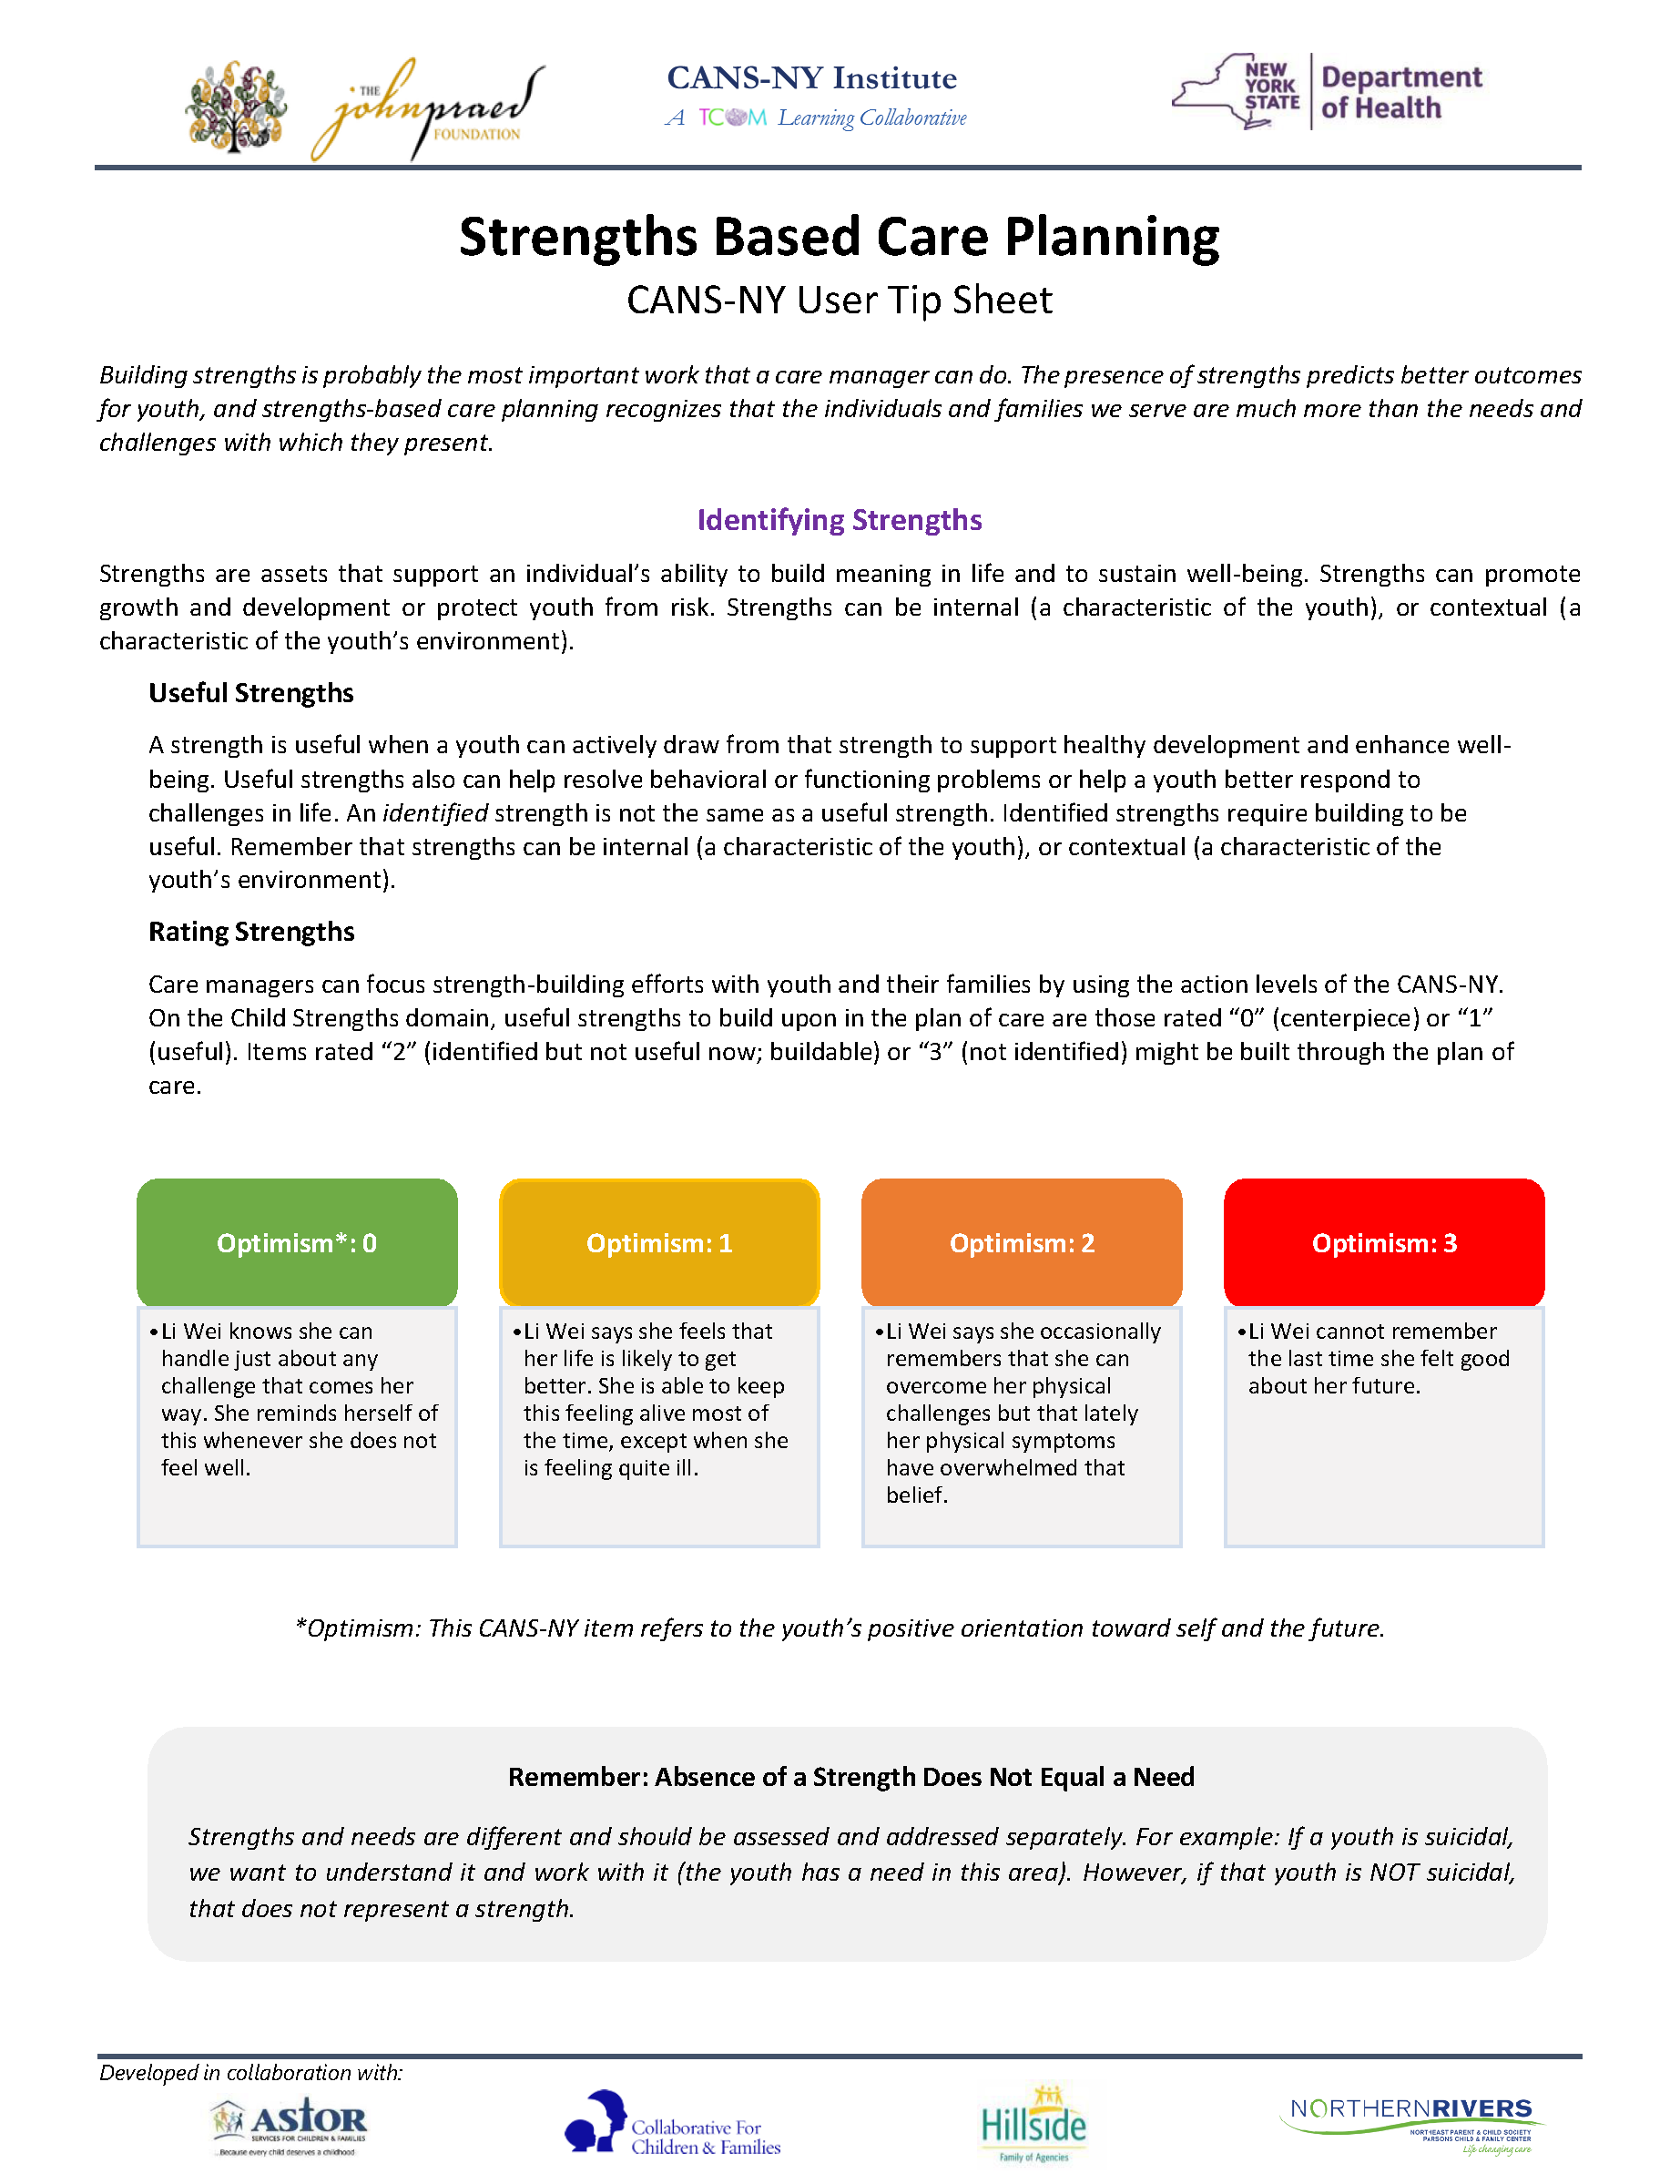 tip-sheet_strengths-bases-care-planning_2021_Page_1.png